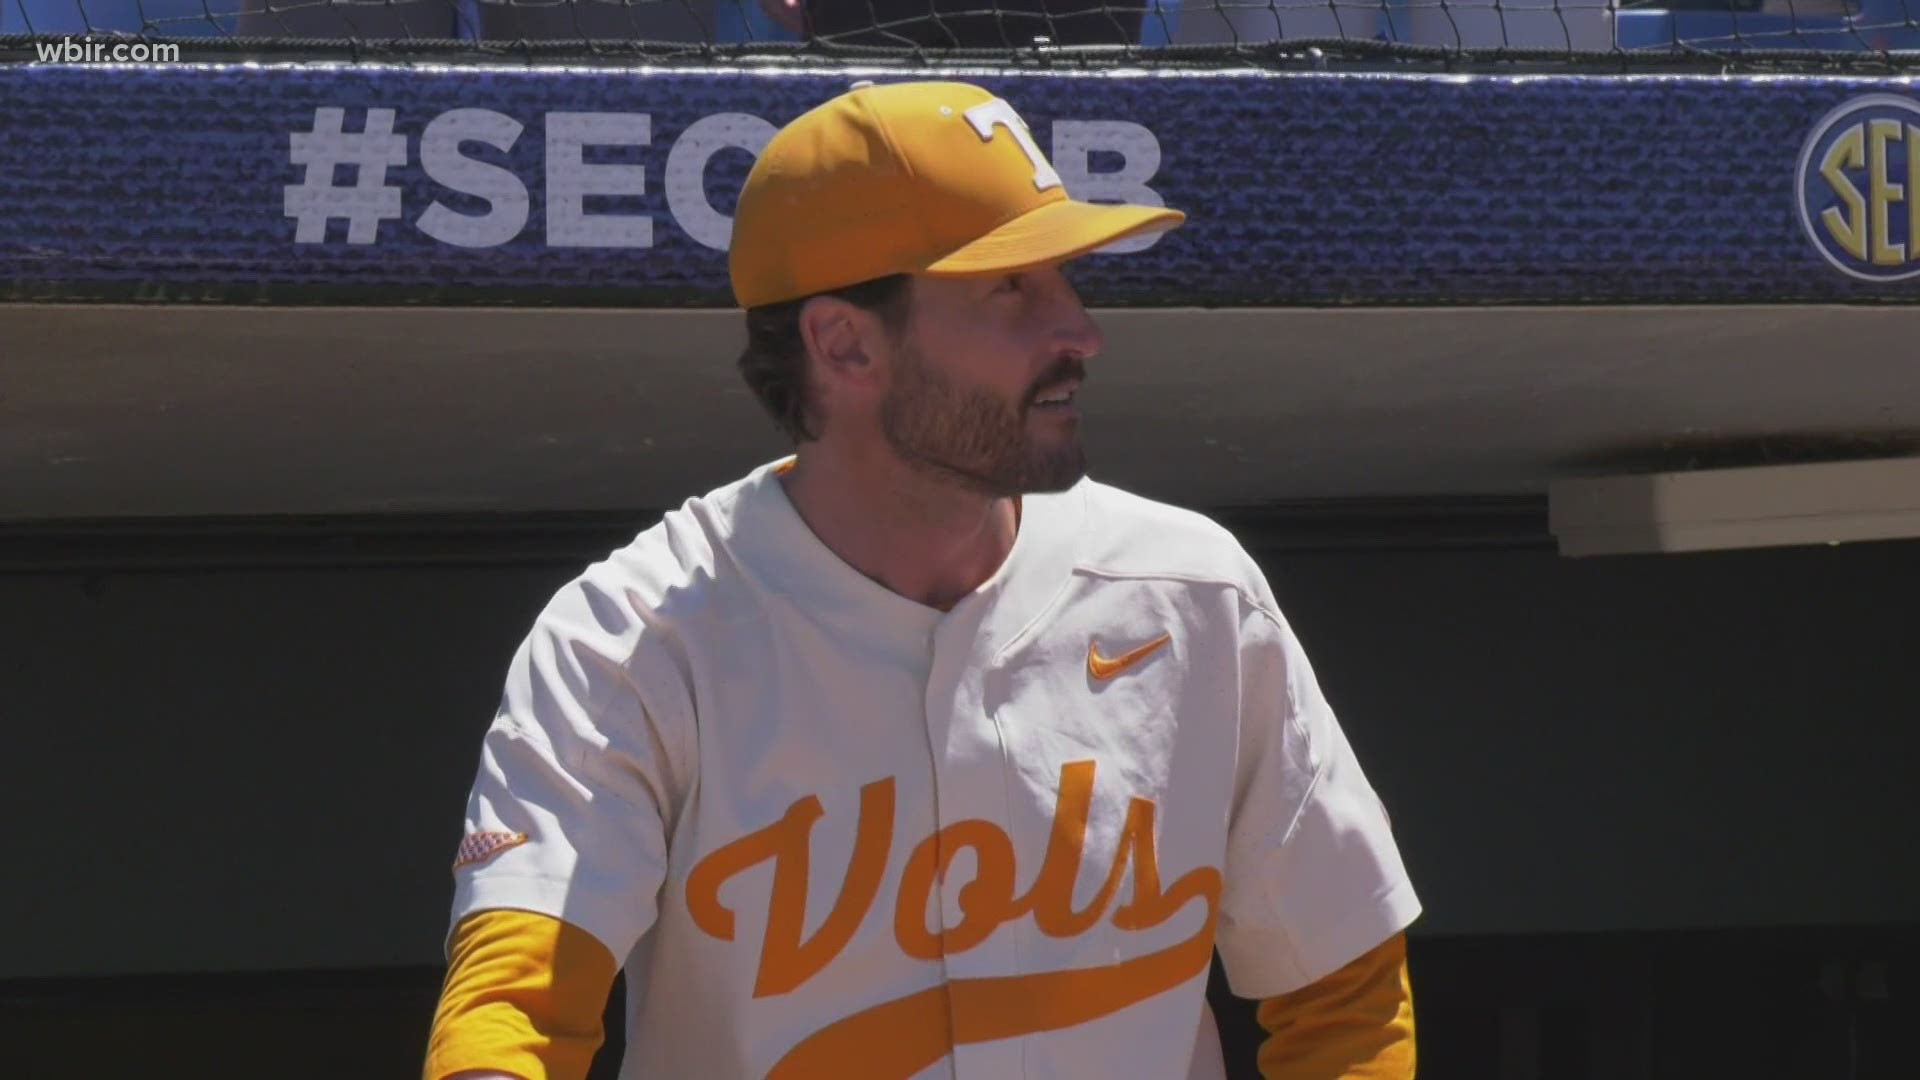 The Vols will host the Knoxville Regional this weekend, the first round of the NCAA baseball tournament. They're a No. 3 seed.